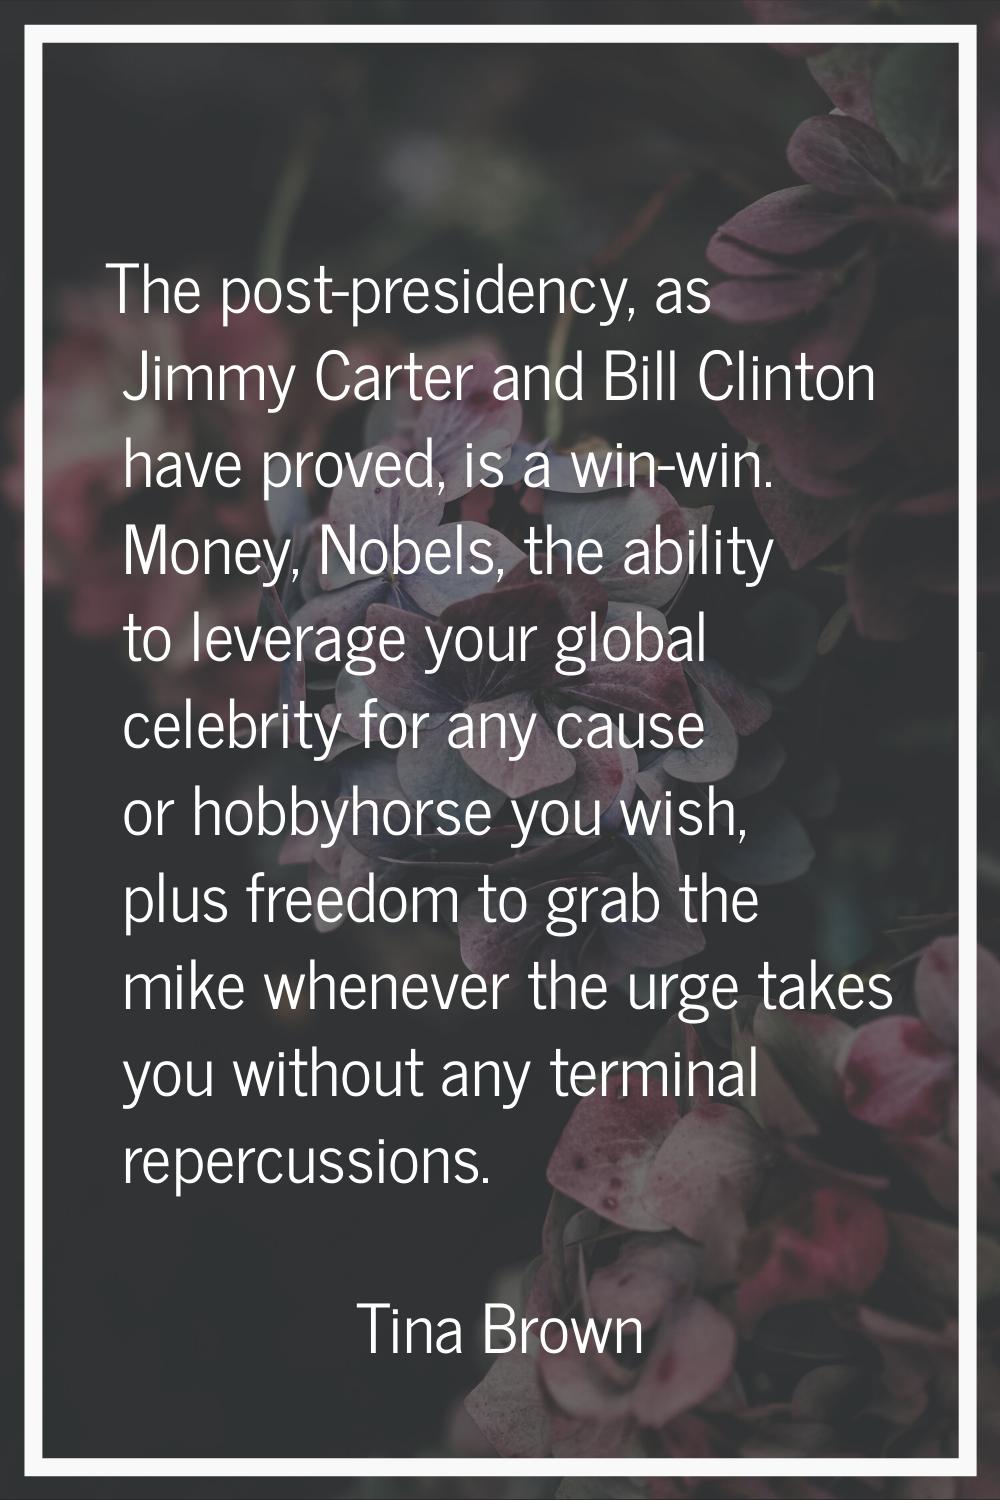 The post-presidency, as Jimmy Carter and Bill Clinton have proved, is a win-win. Money, Nobels, the